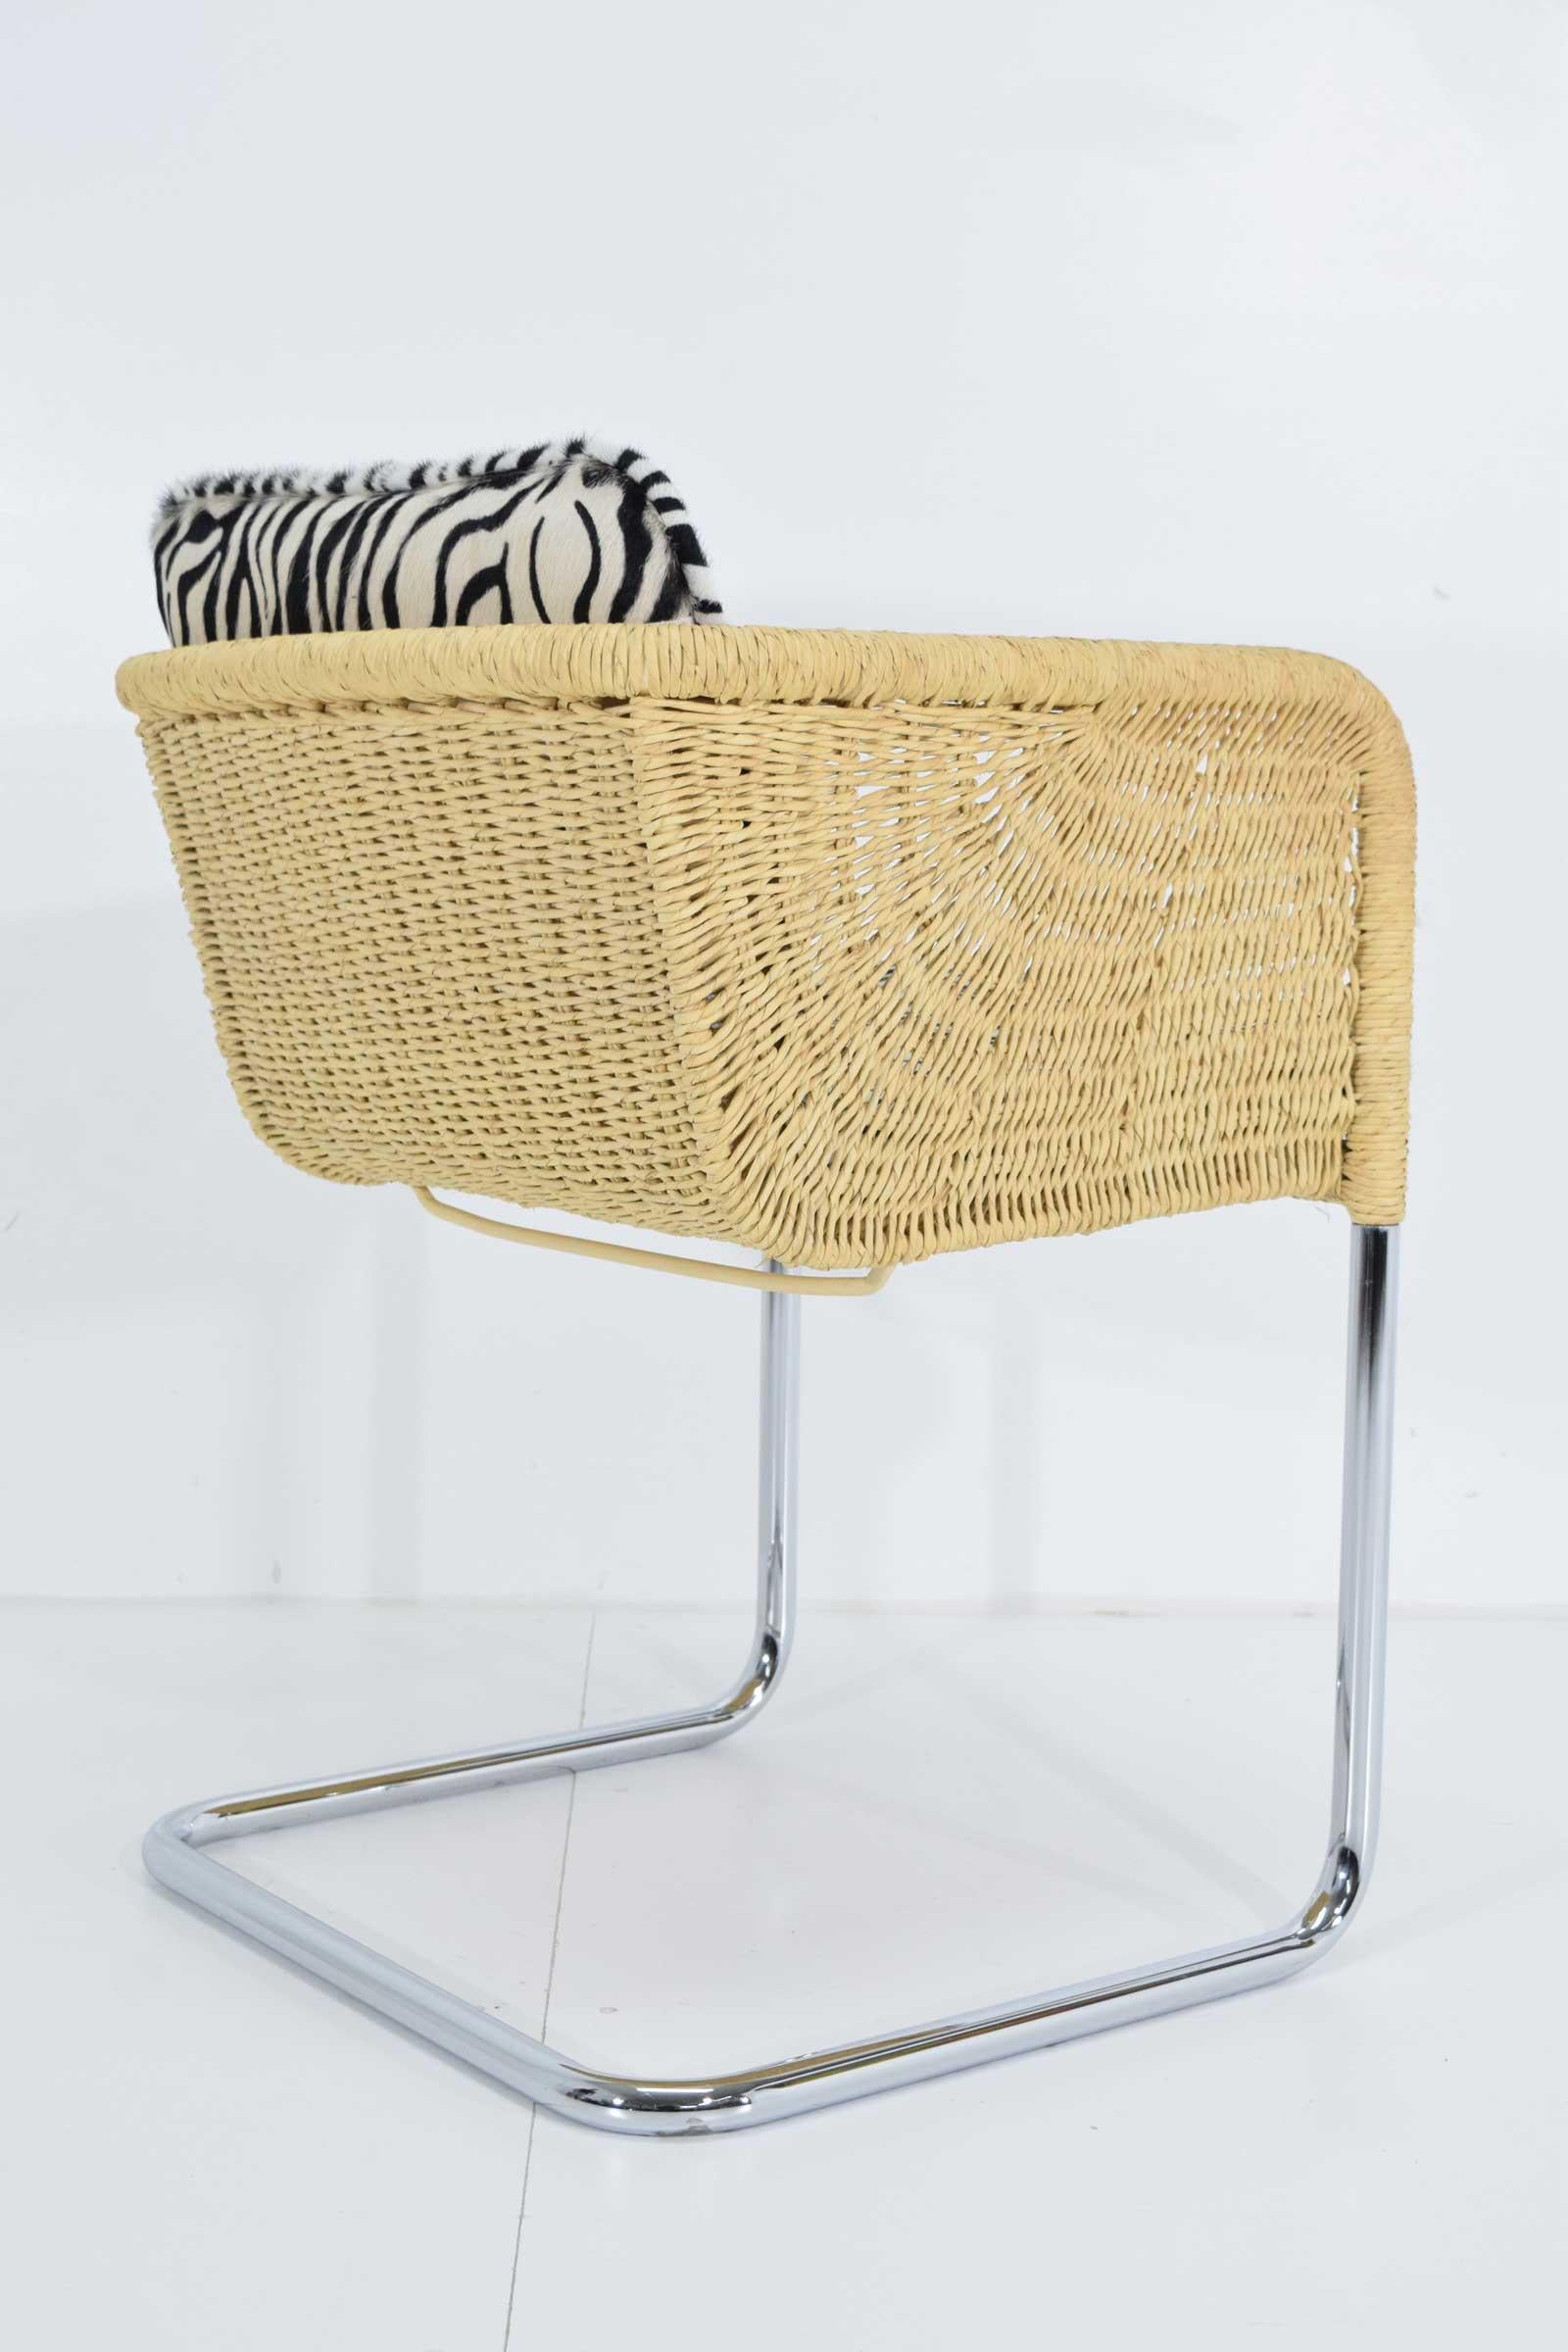 Harvey Probber Wicker Dining Chairs with Zebra Hide Cushions 1